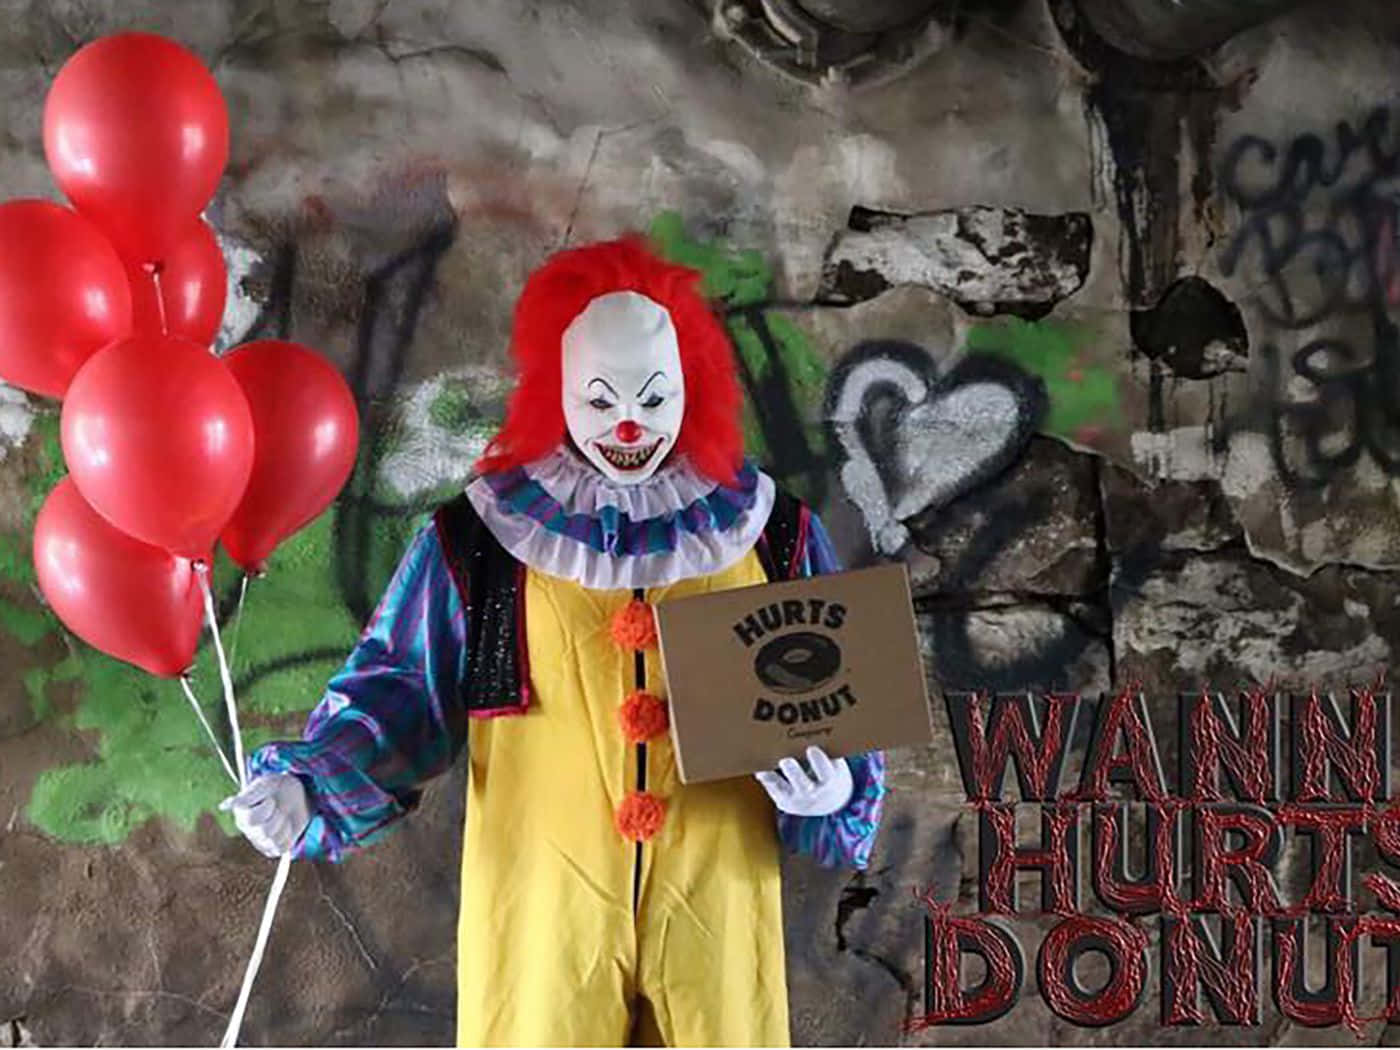 a clown holding balloons and a sign that says wanna hurt donuts